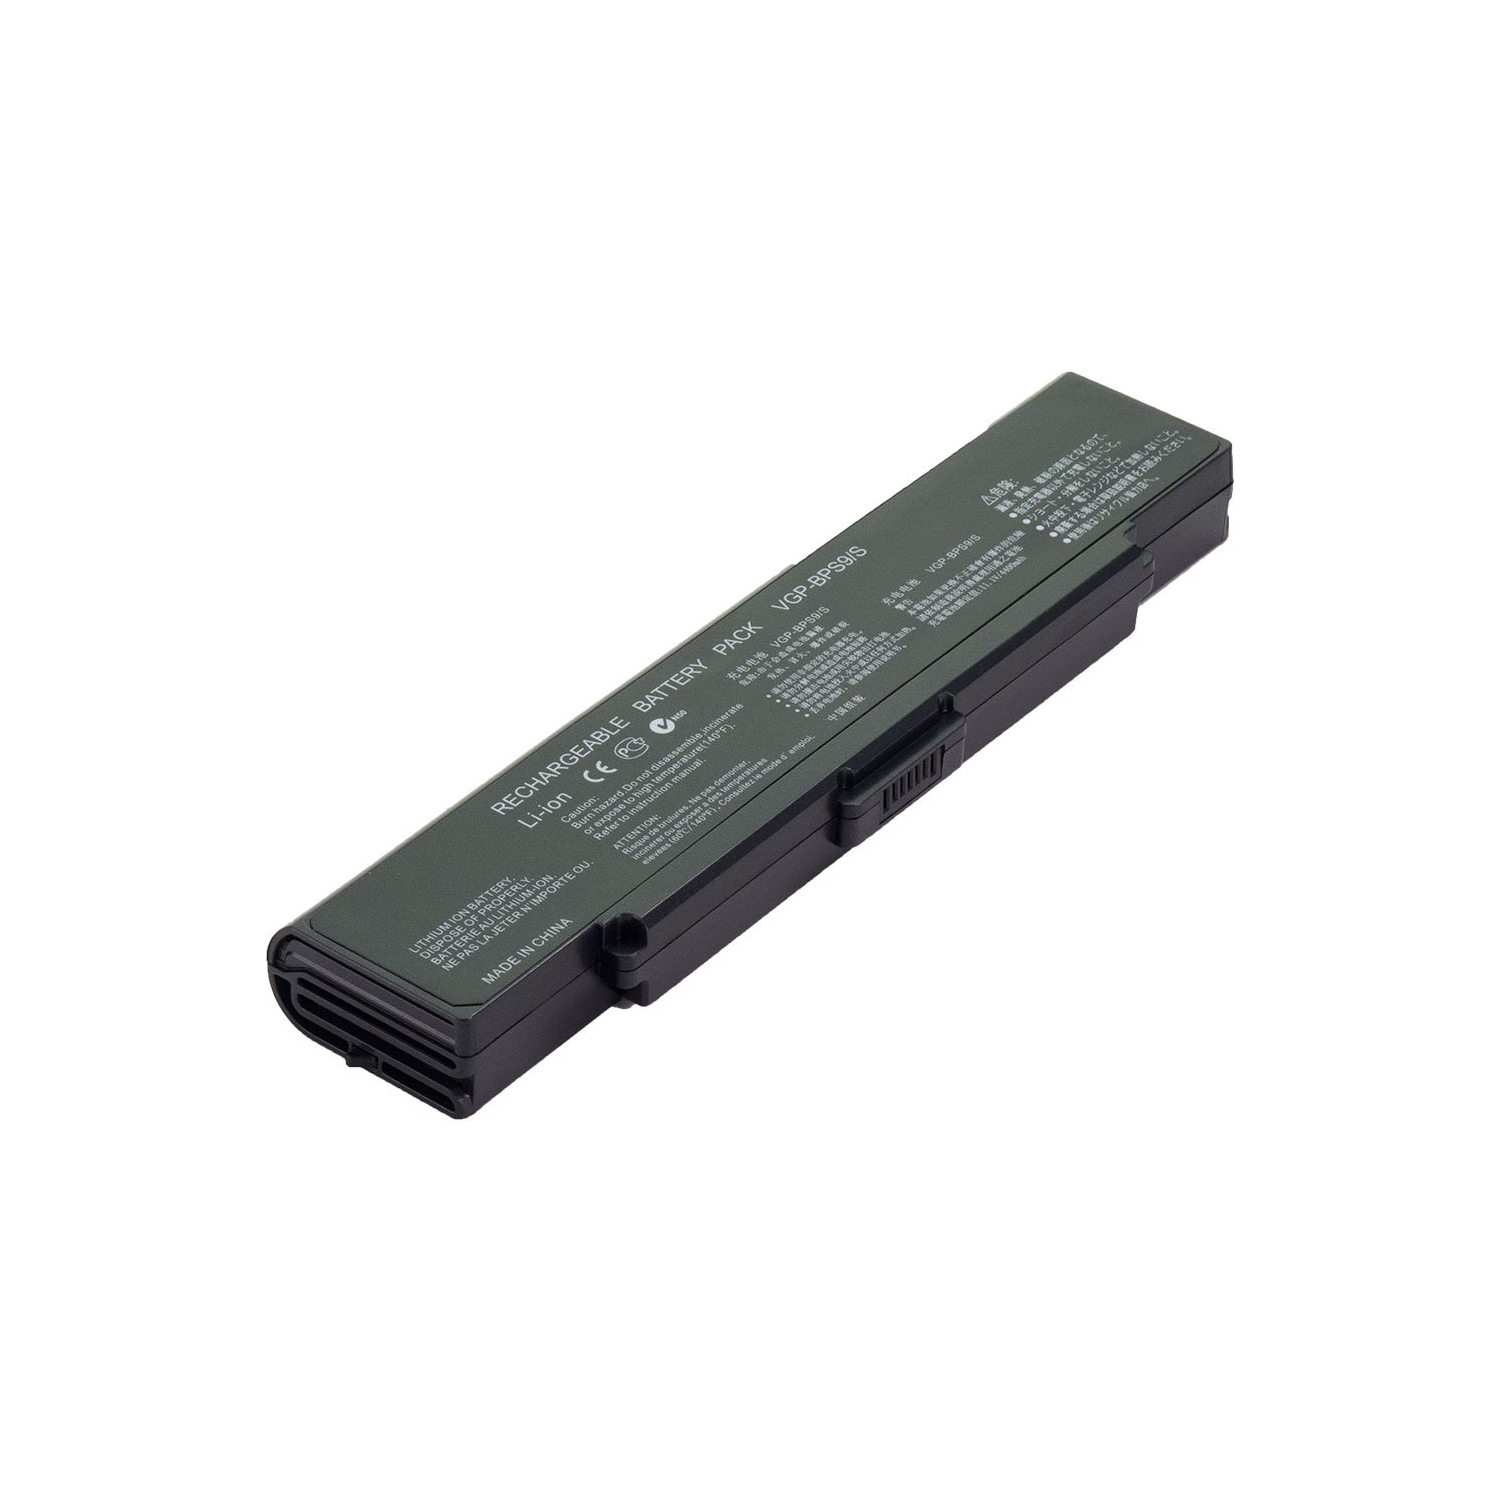 Laptop Battery Replacement for Sony VAIO VGN-CR420E/P, VGP-BPL9, VGP-BPS10/S, VGP-BPS10A/B, VGP-BPS9A, VGP-BPS9B